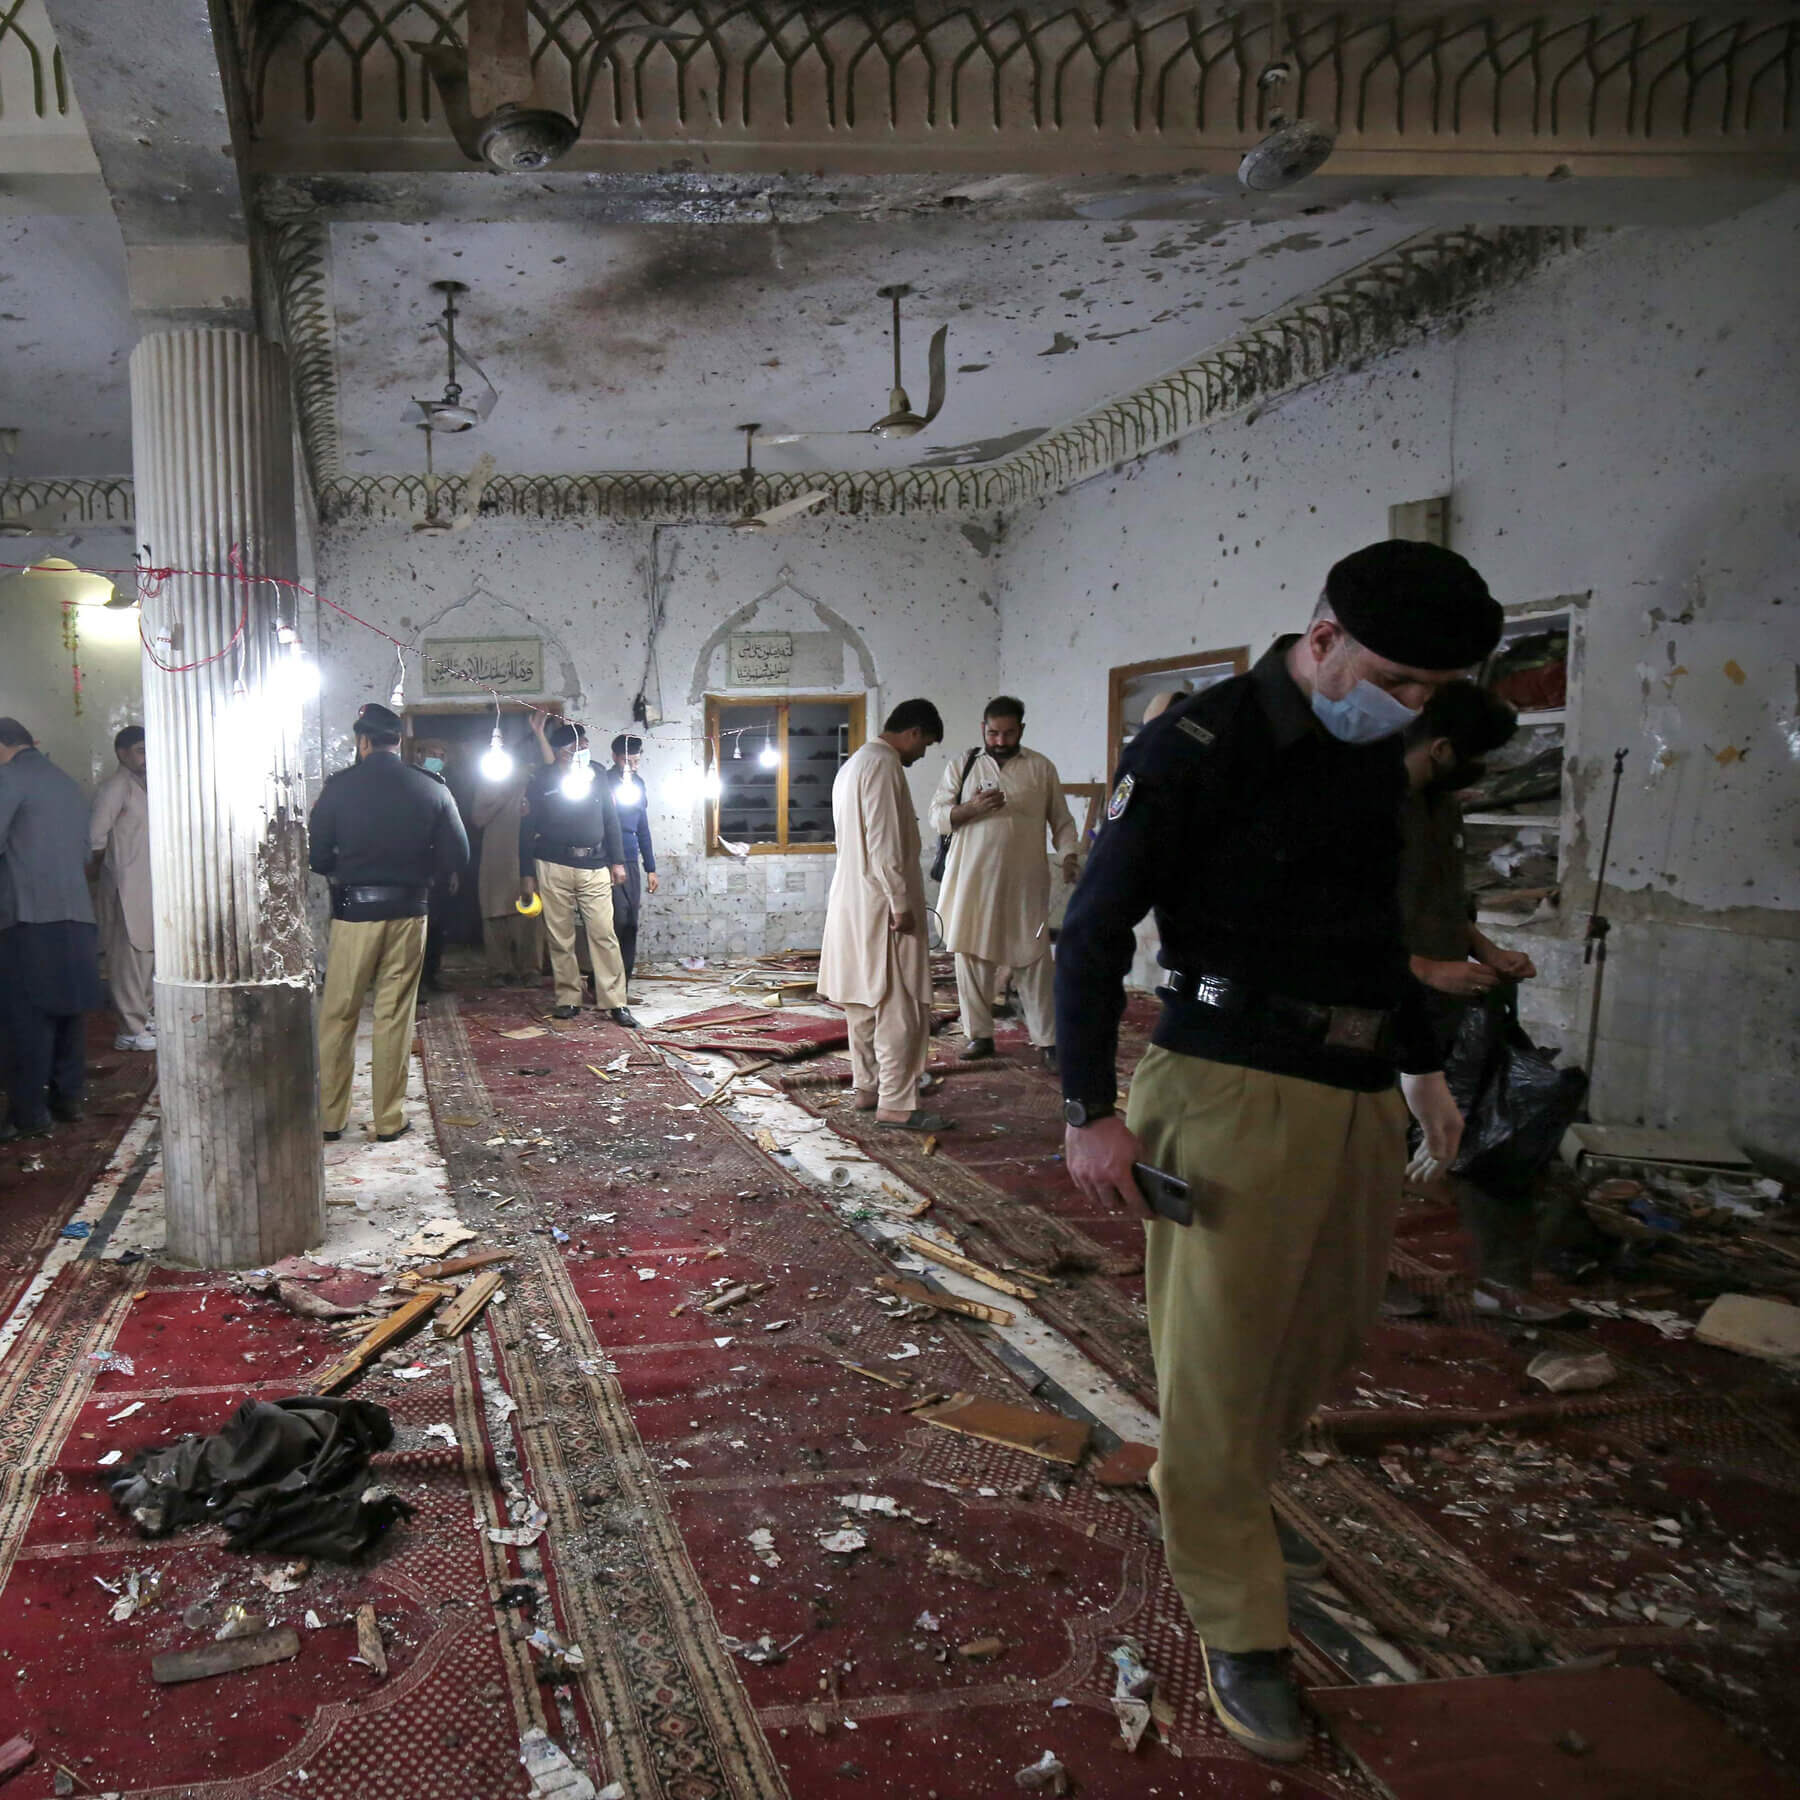 62 Killed, 200 Injured in ISIS-K Attack on Shia Mosque in Peshawar